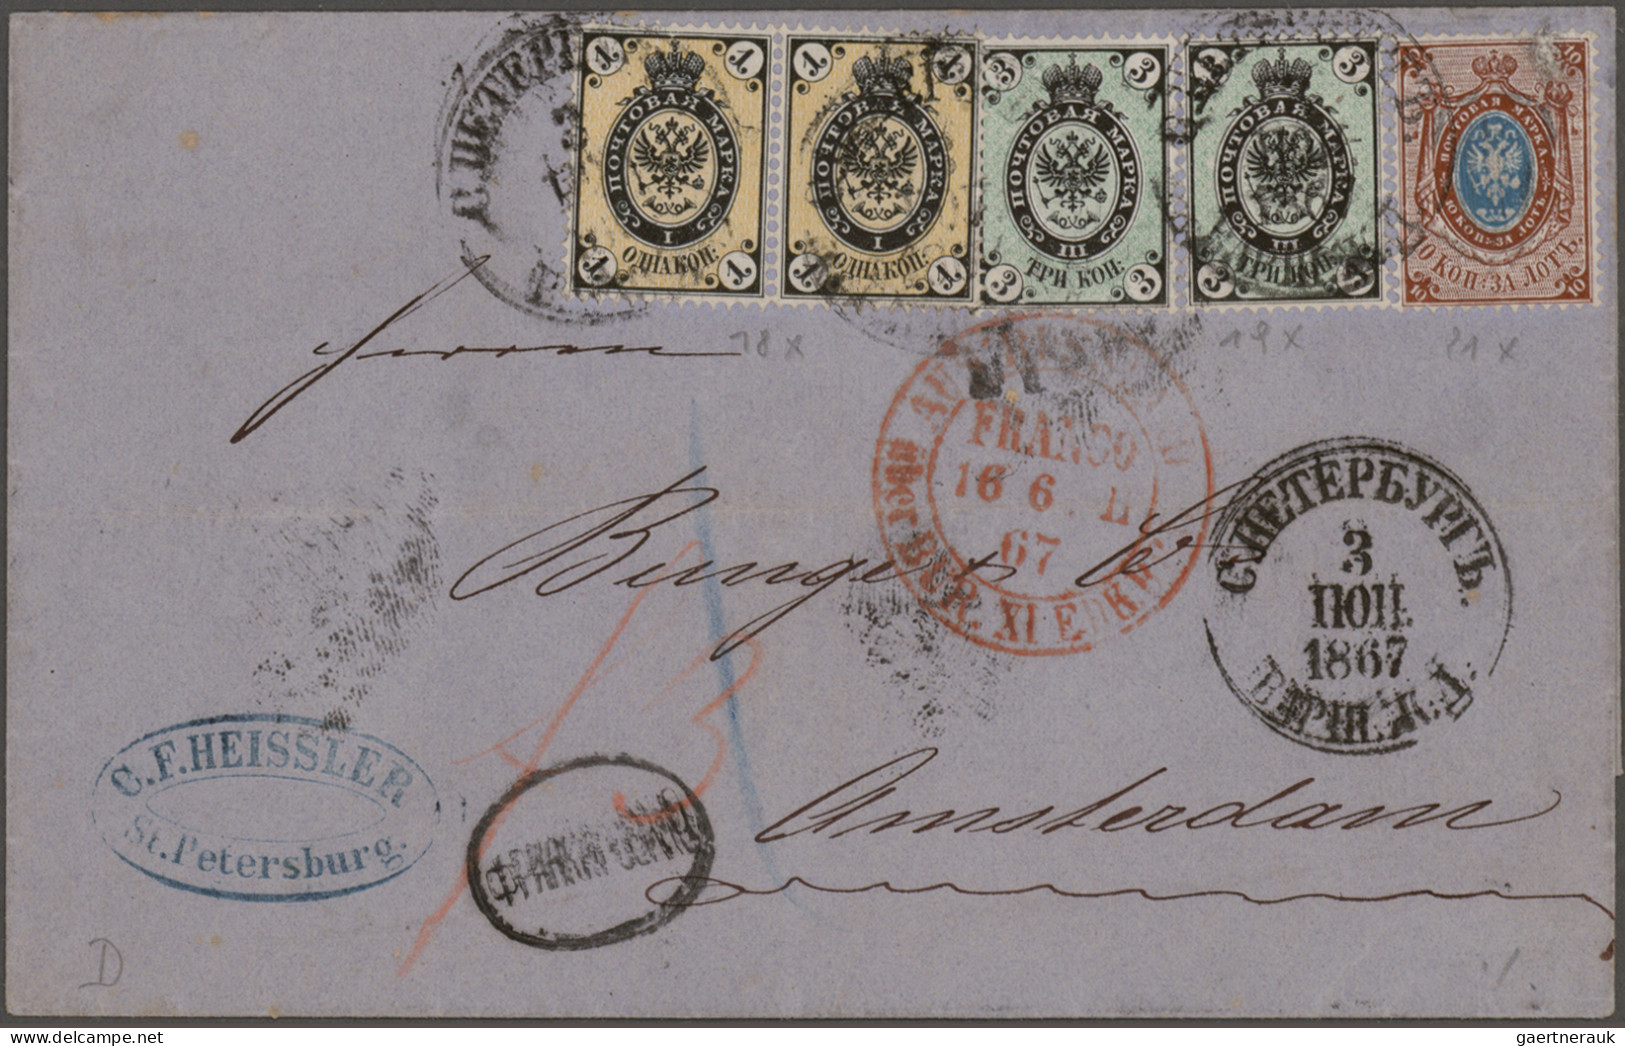 Russia: 1854-1883: Collection of 22 covers and postcards including 16 items from